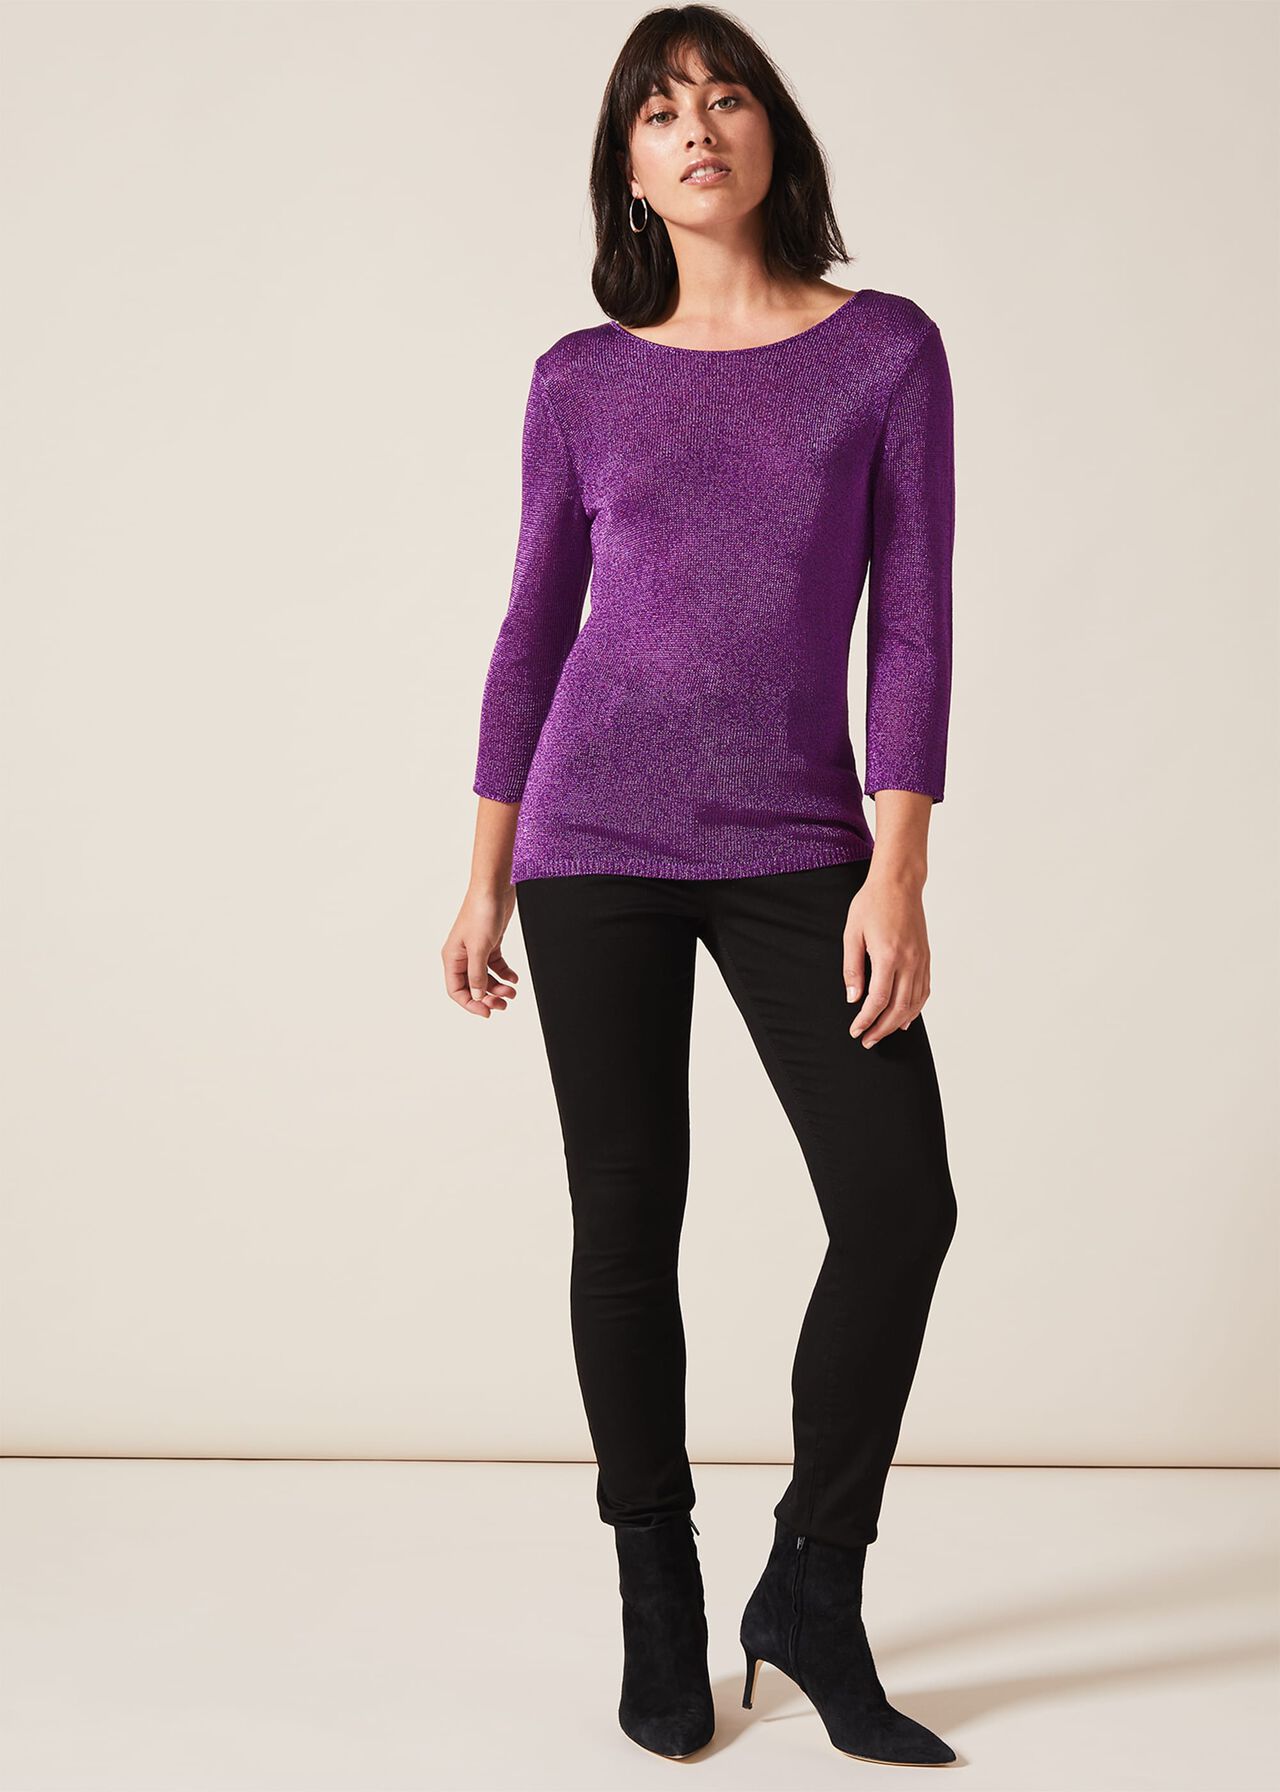 Macey Metallic Fitted Jumper | Phase Eight